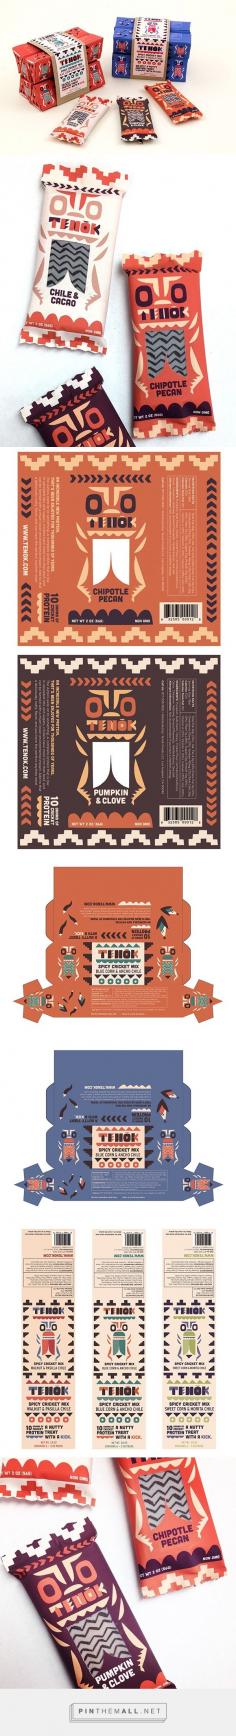 
                    
                        Tenok Cricket Snacks on Behance by Alexander Vidal curated by Packaging Diva PD. Yummy cricket (insect) snack packaging : )
                    
                